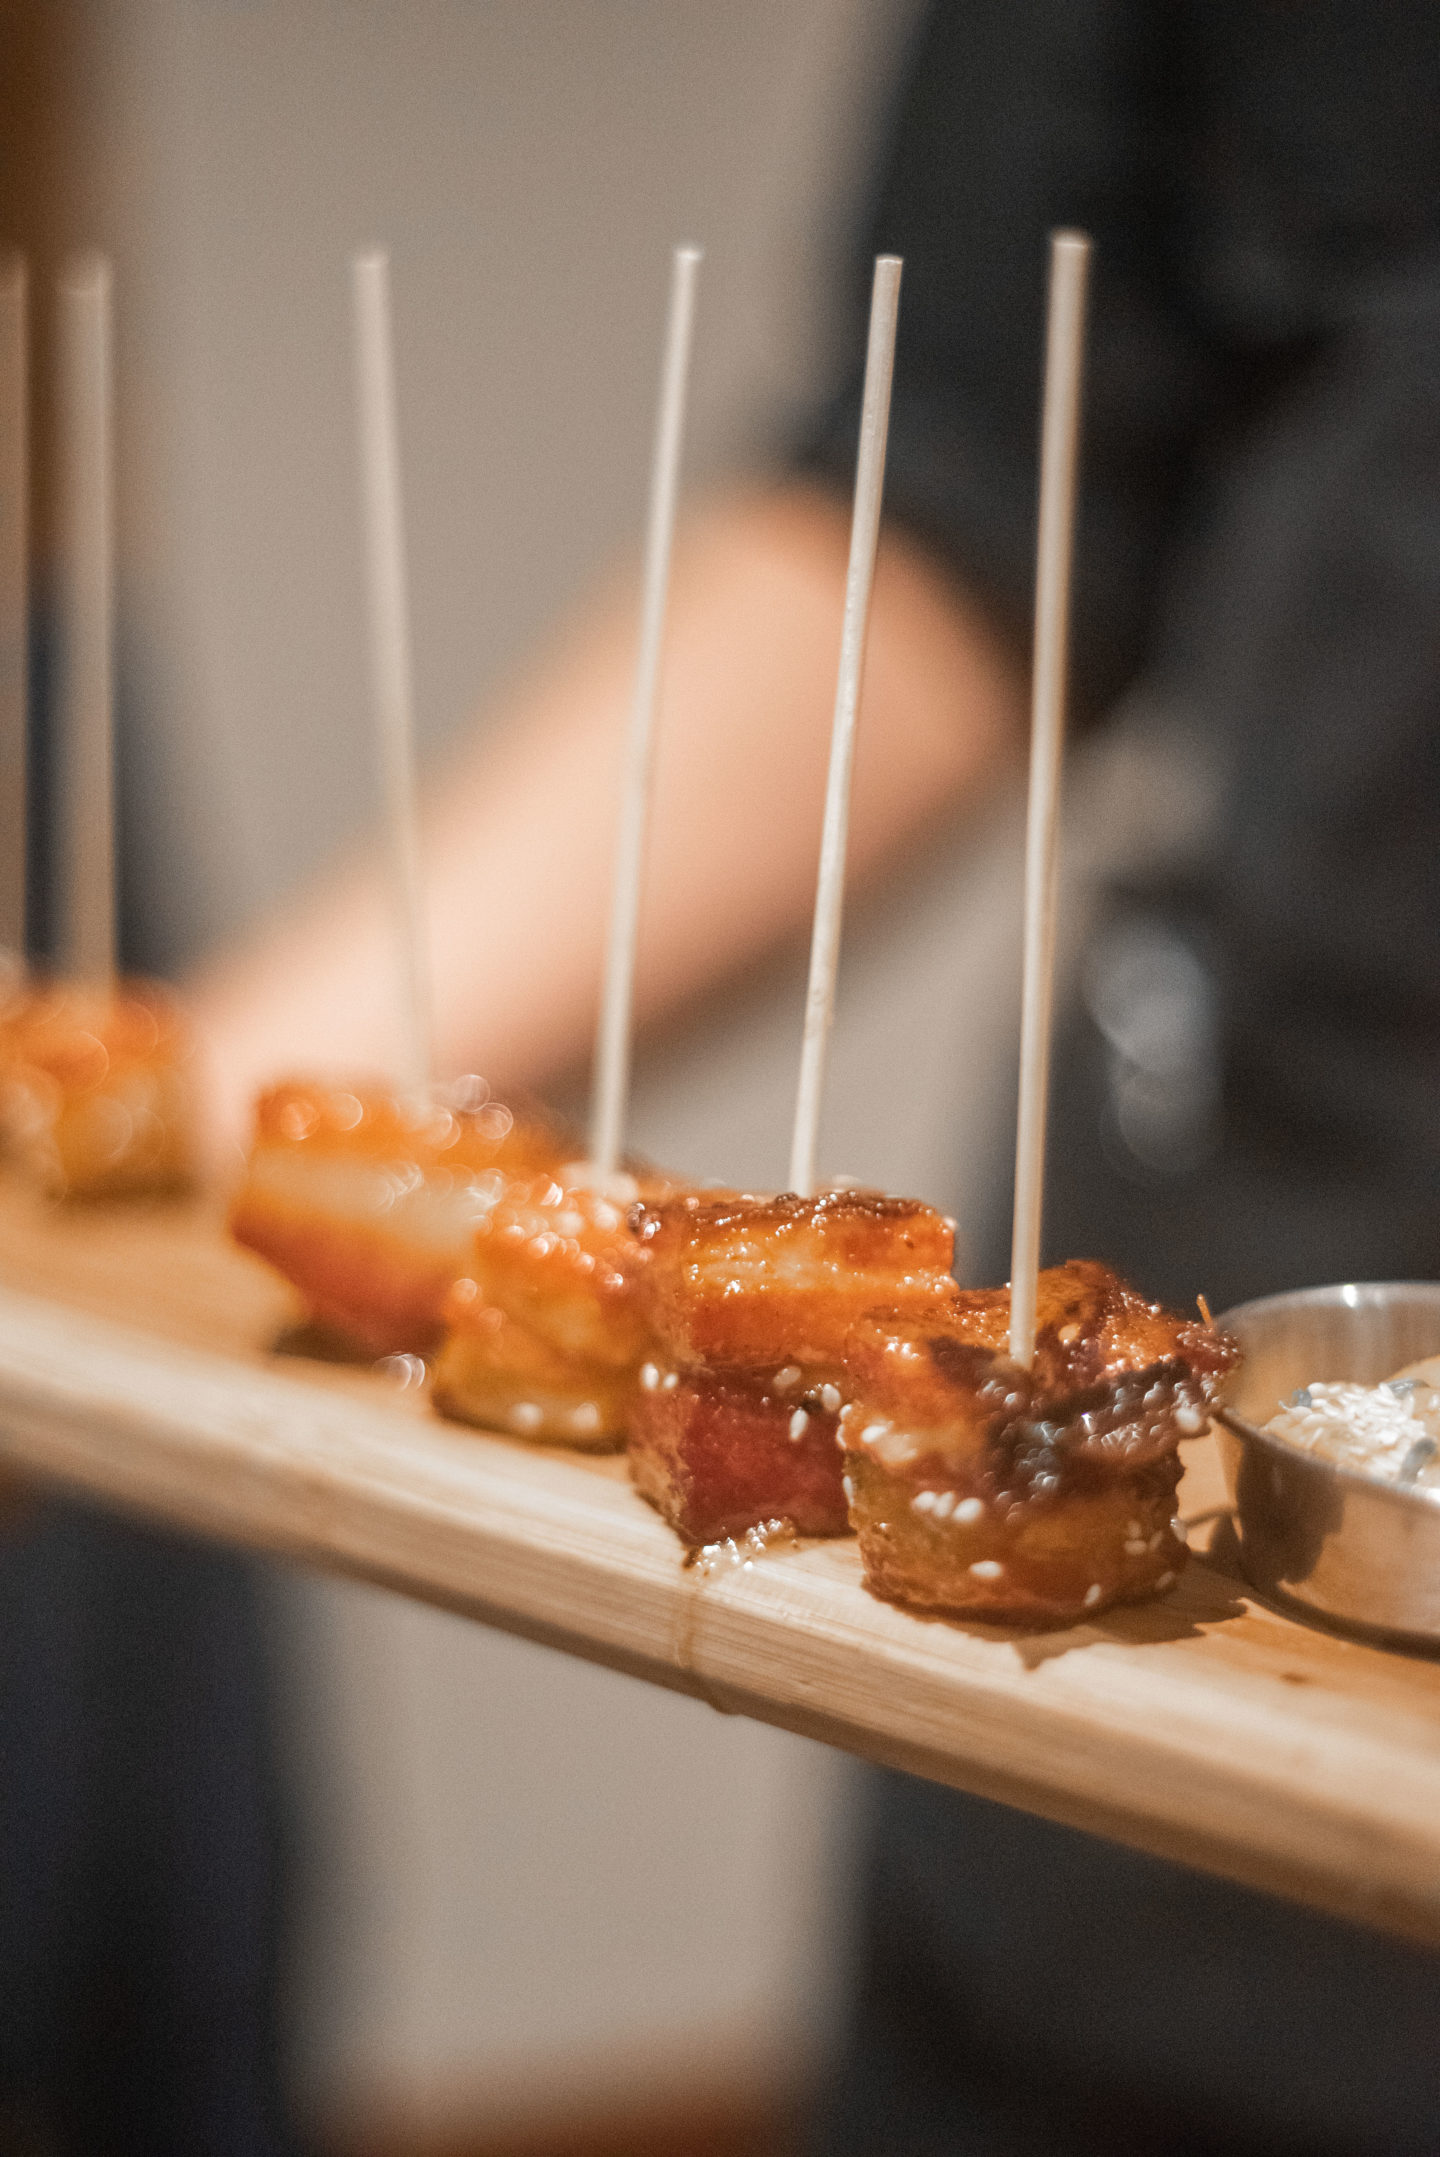 Pieces of pork belly on toothpicks